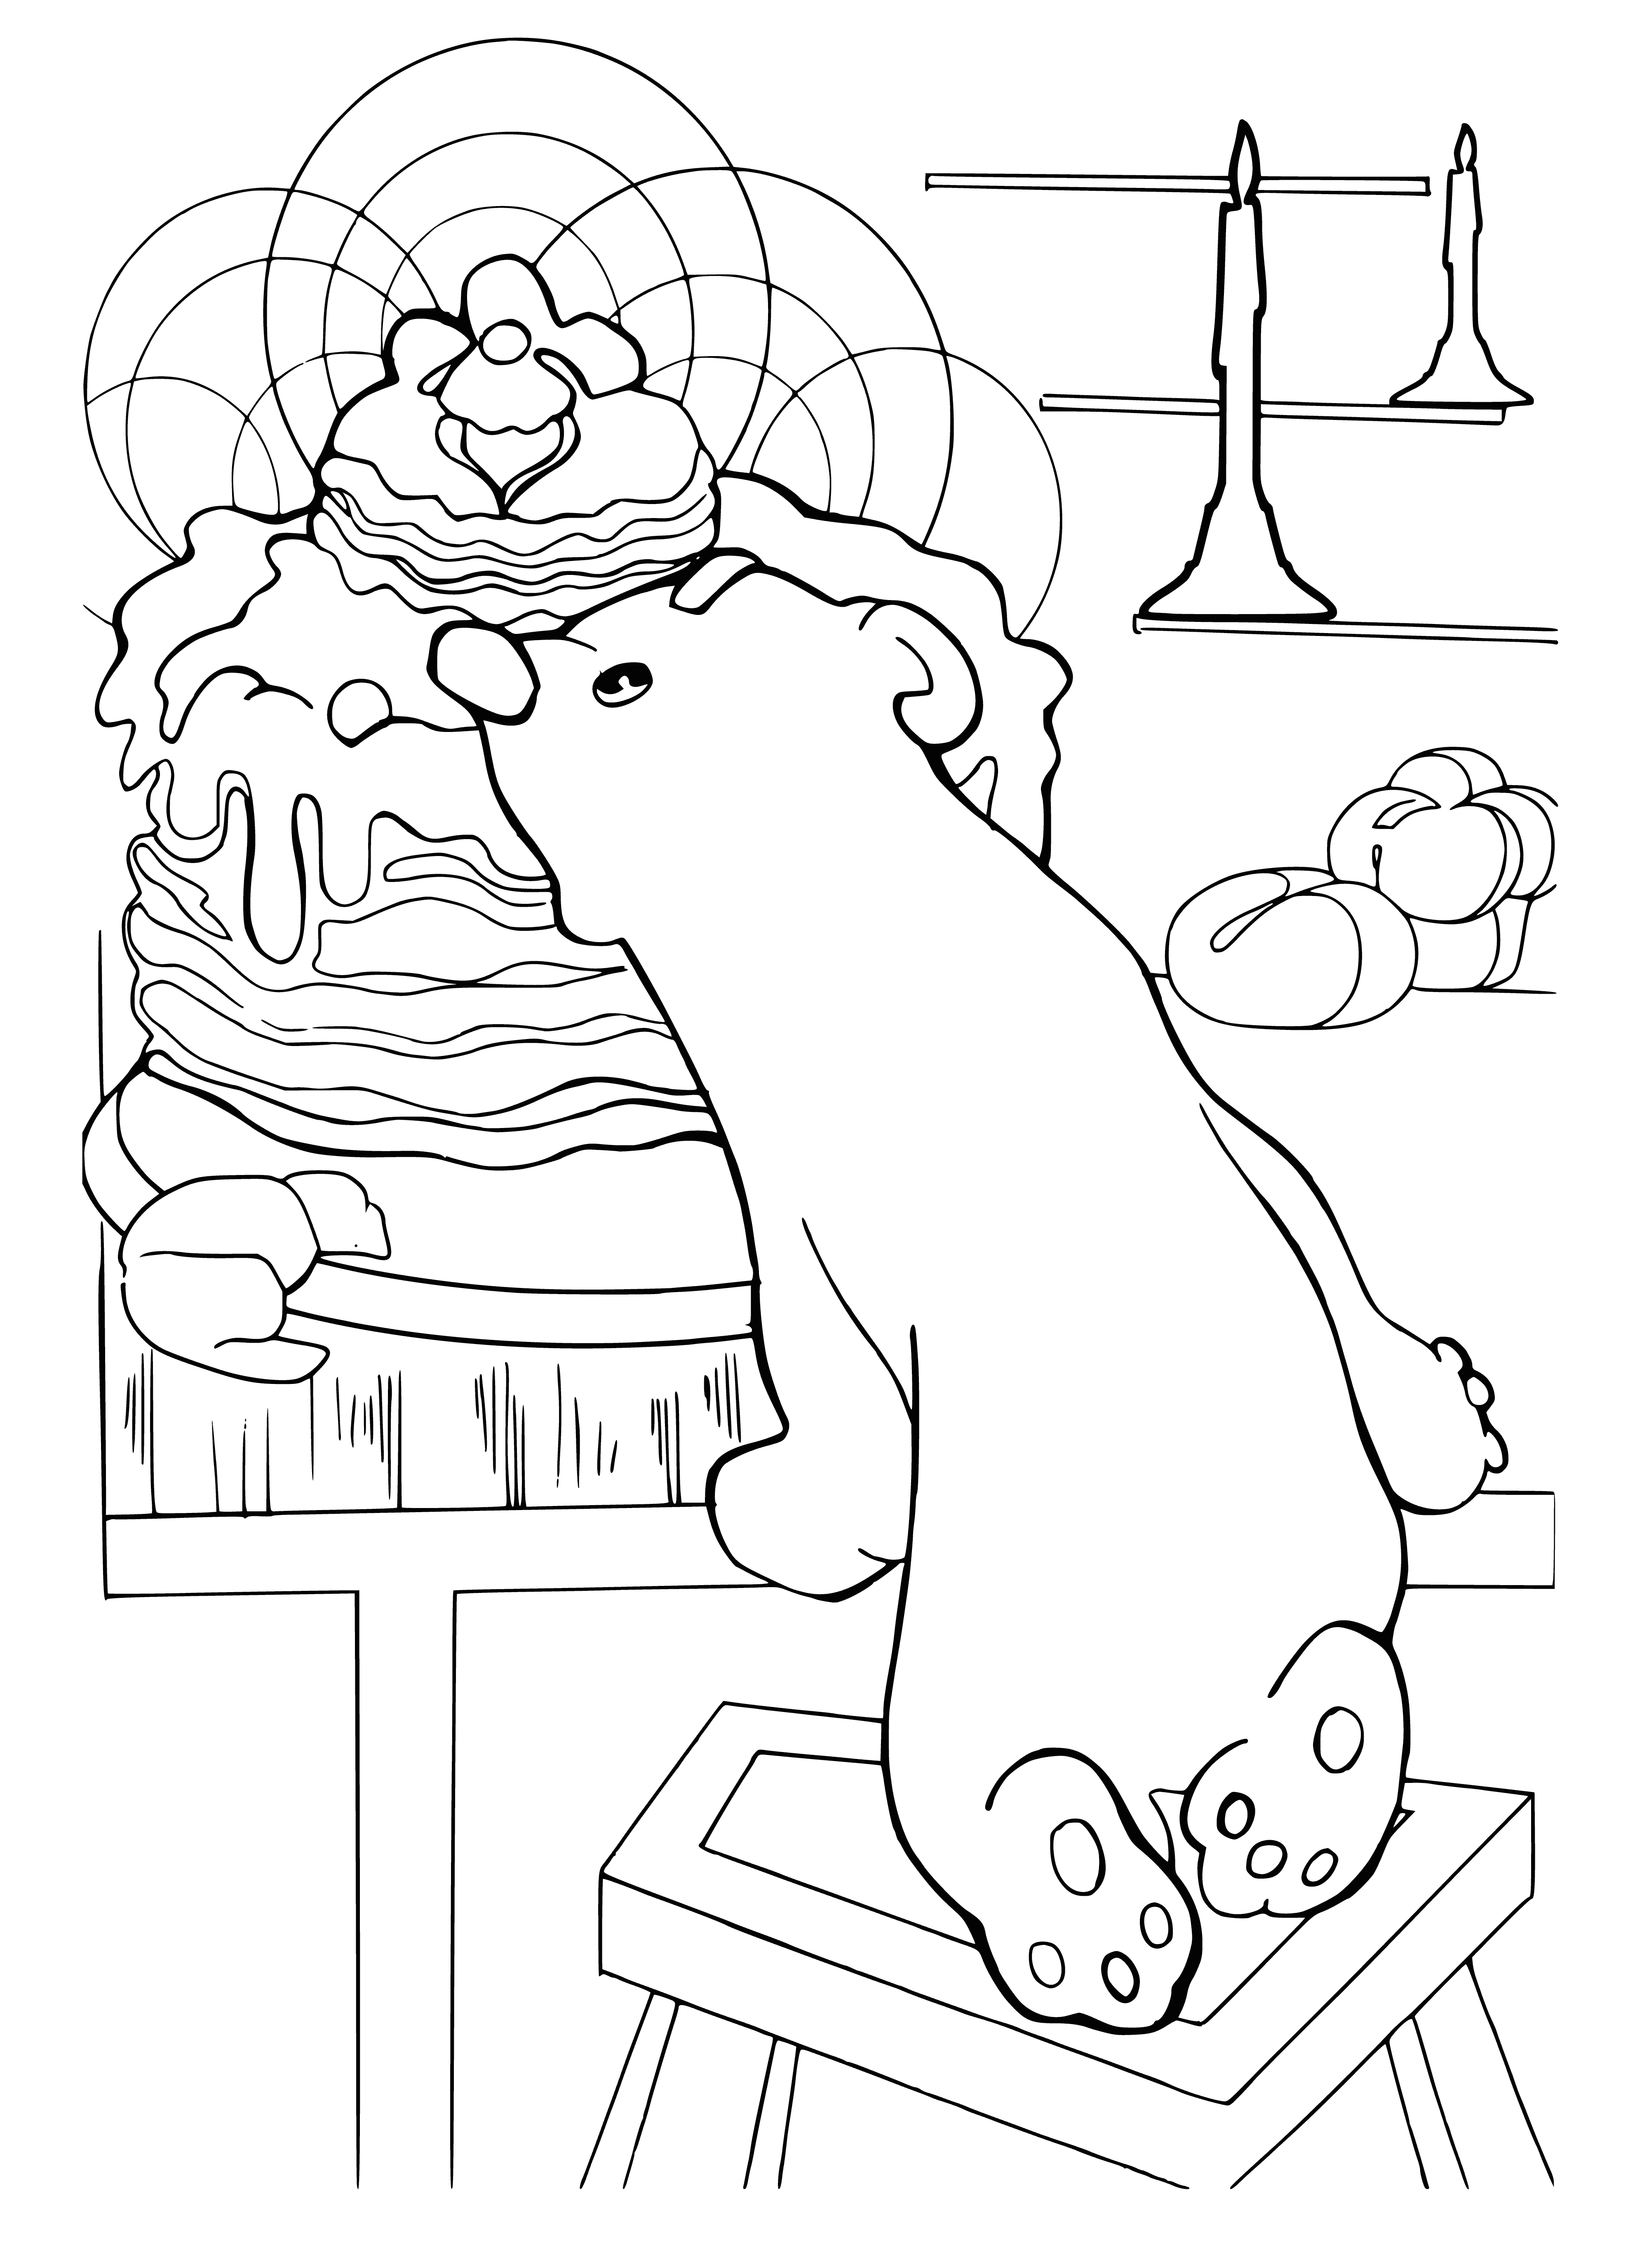 coloring page: Umka found a tasty cake on a plate with a fork, ready to eat!